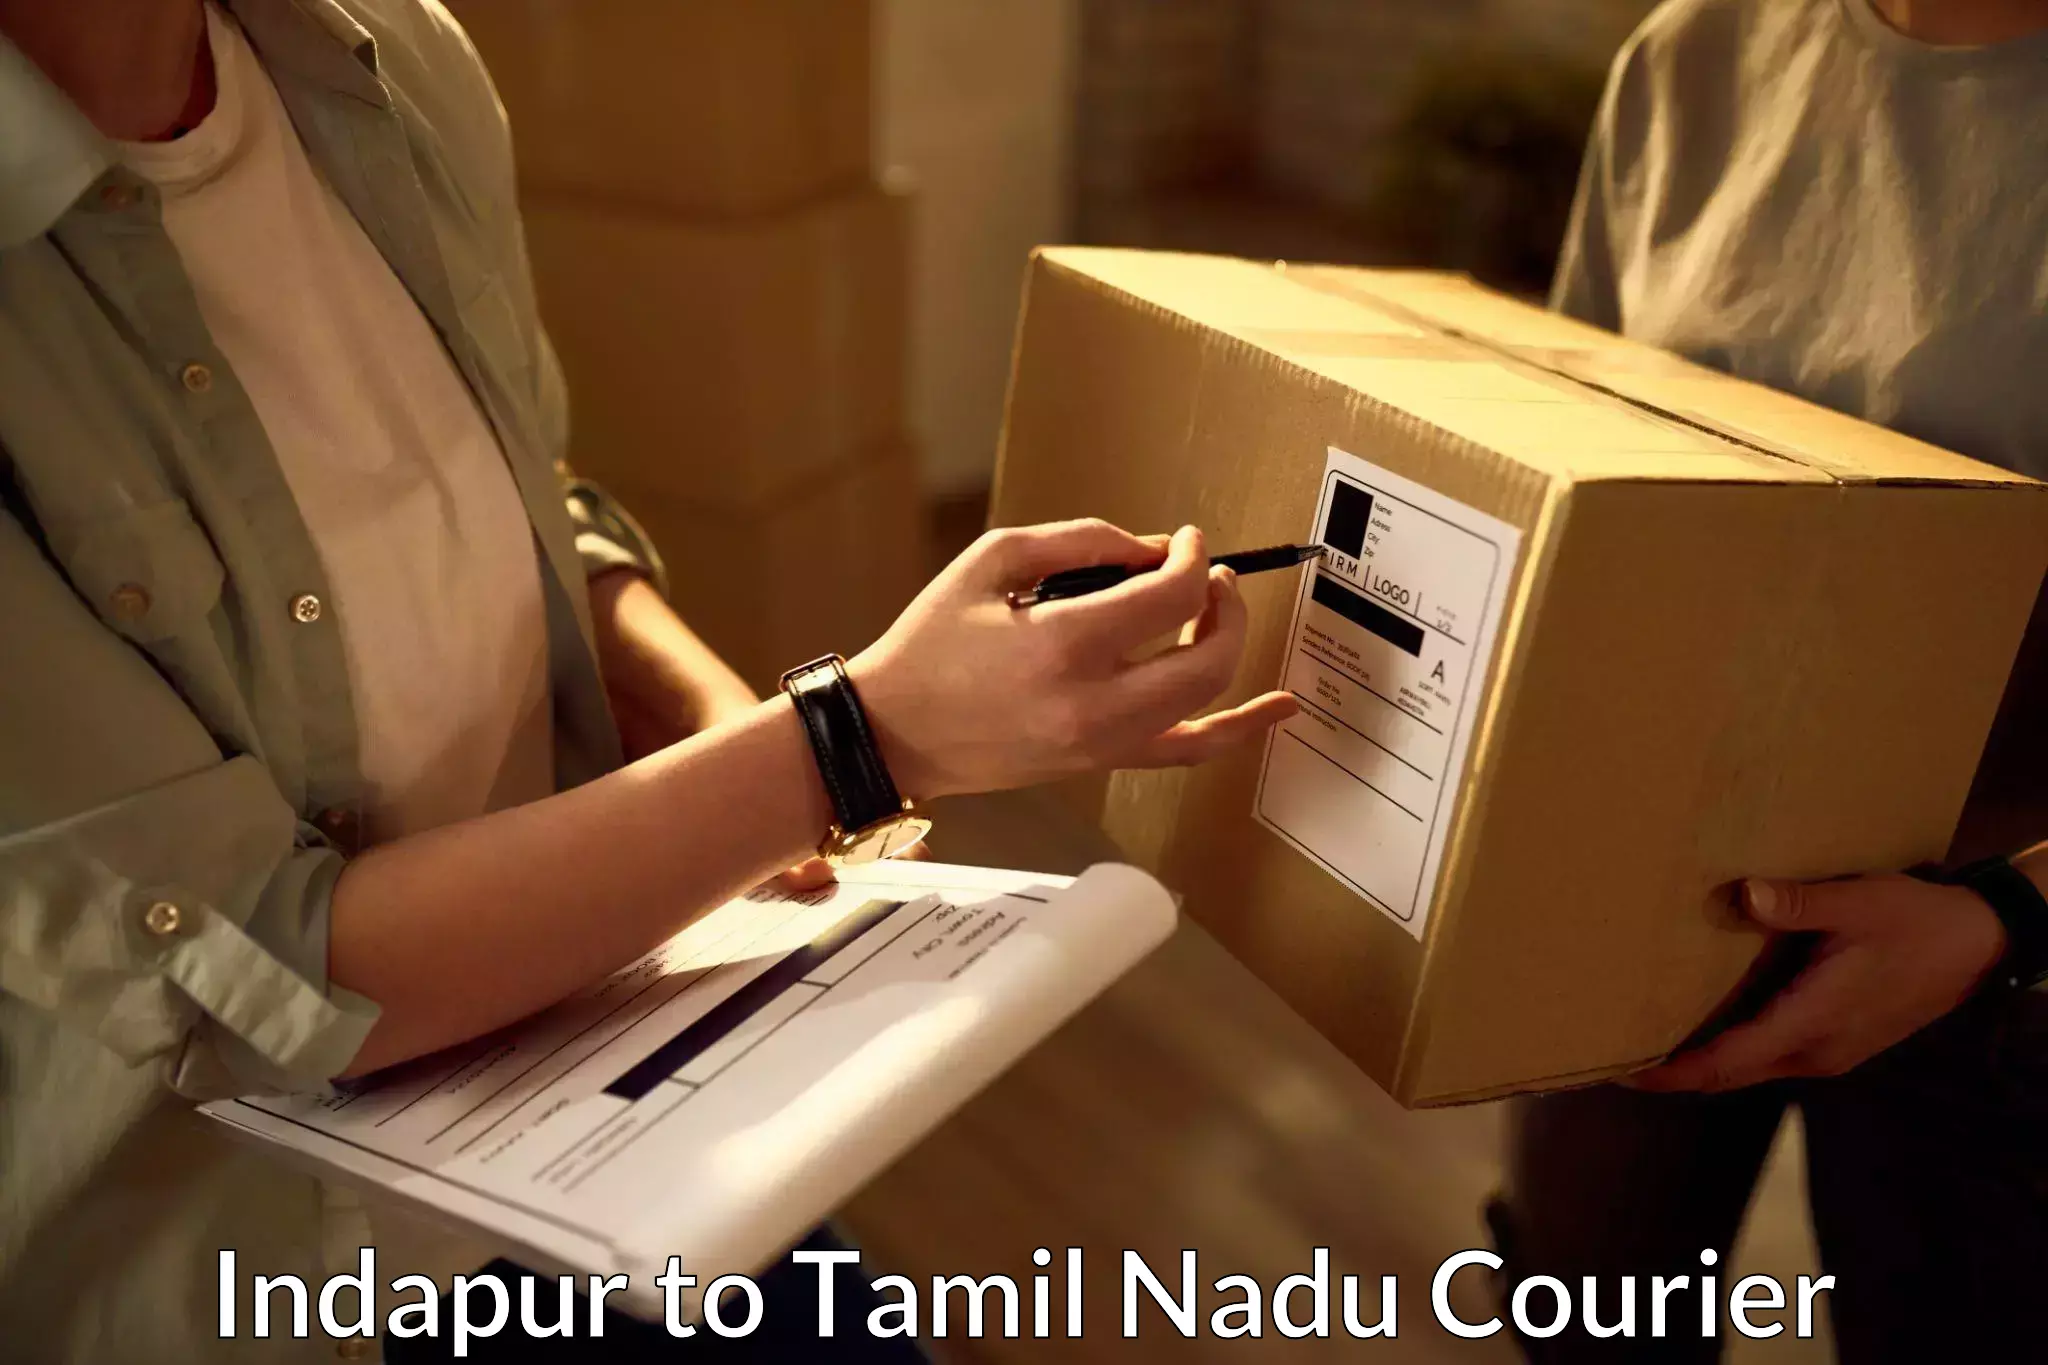 Courier service booking Indapur to Perunali